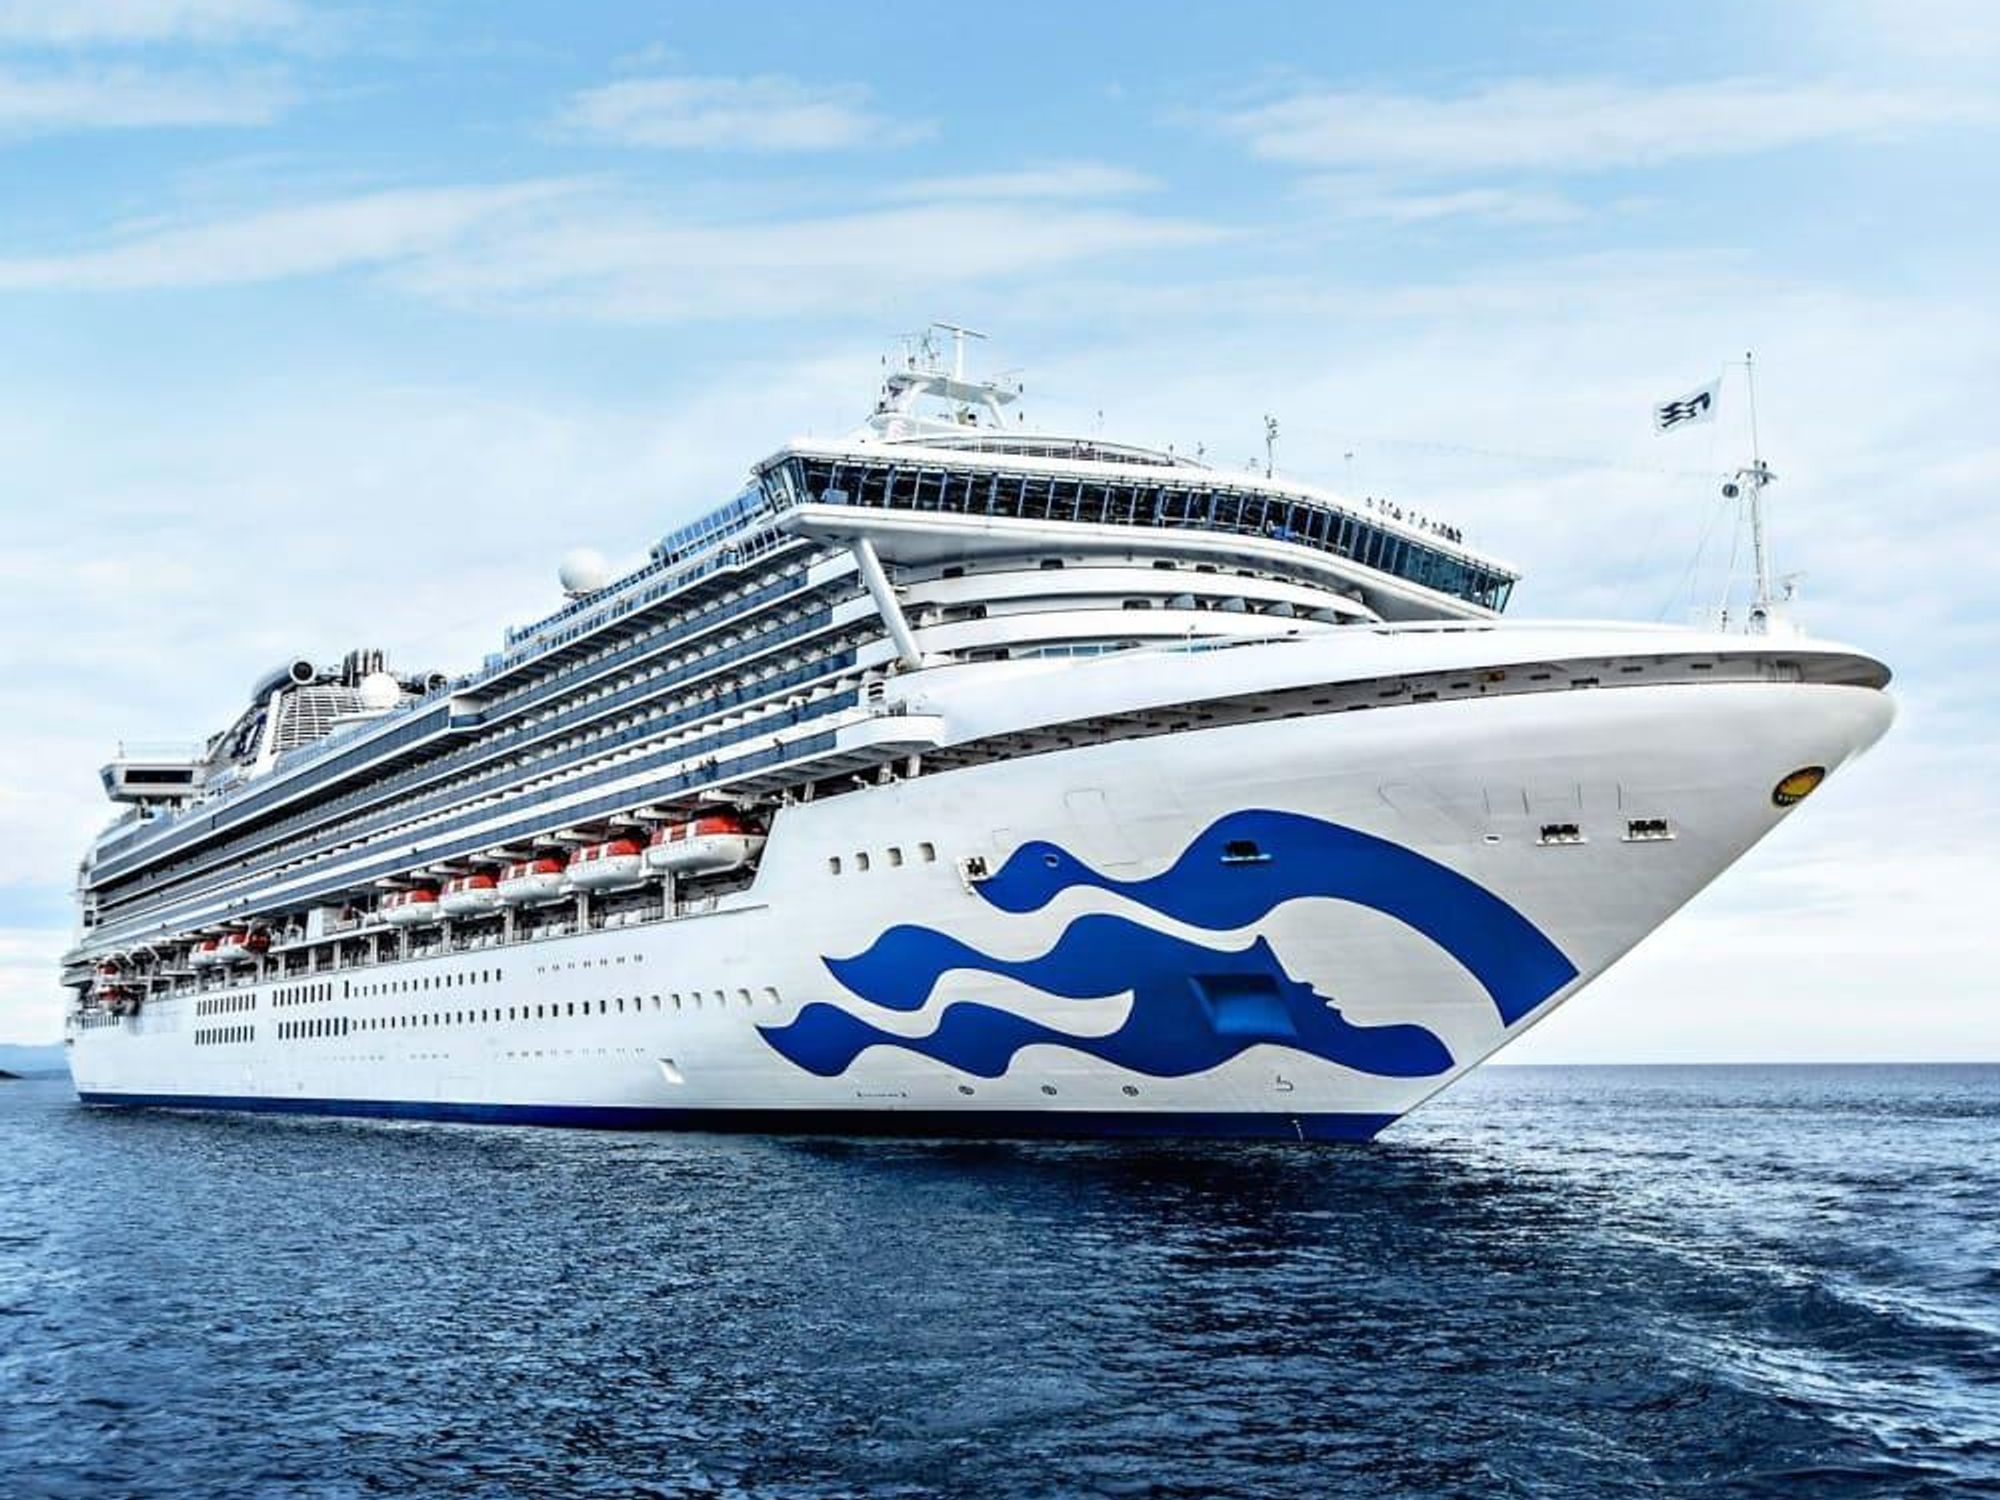 Princess cruises back into Galveston with new voyages to sunny spots